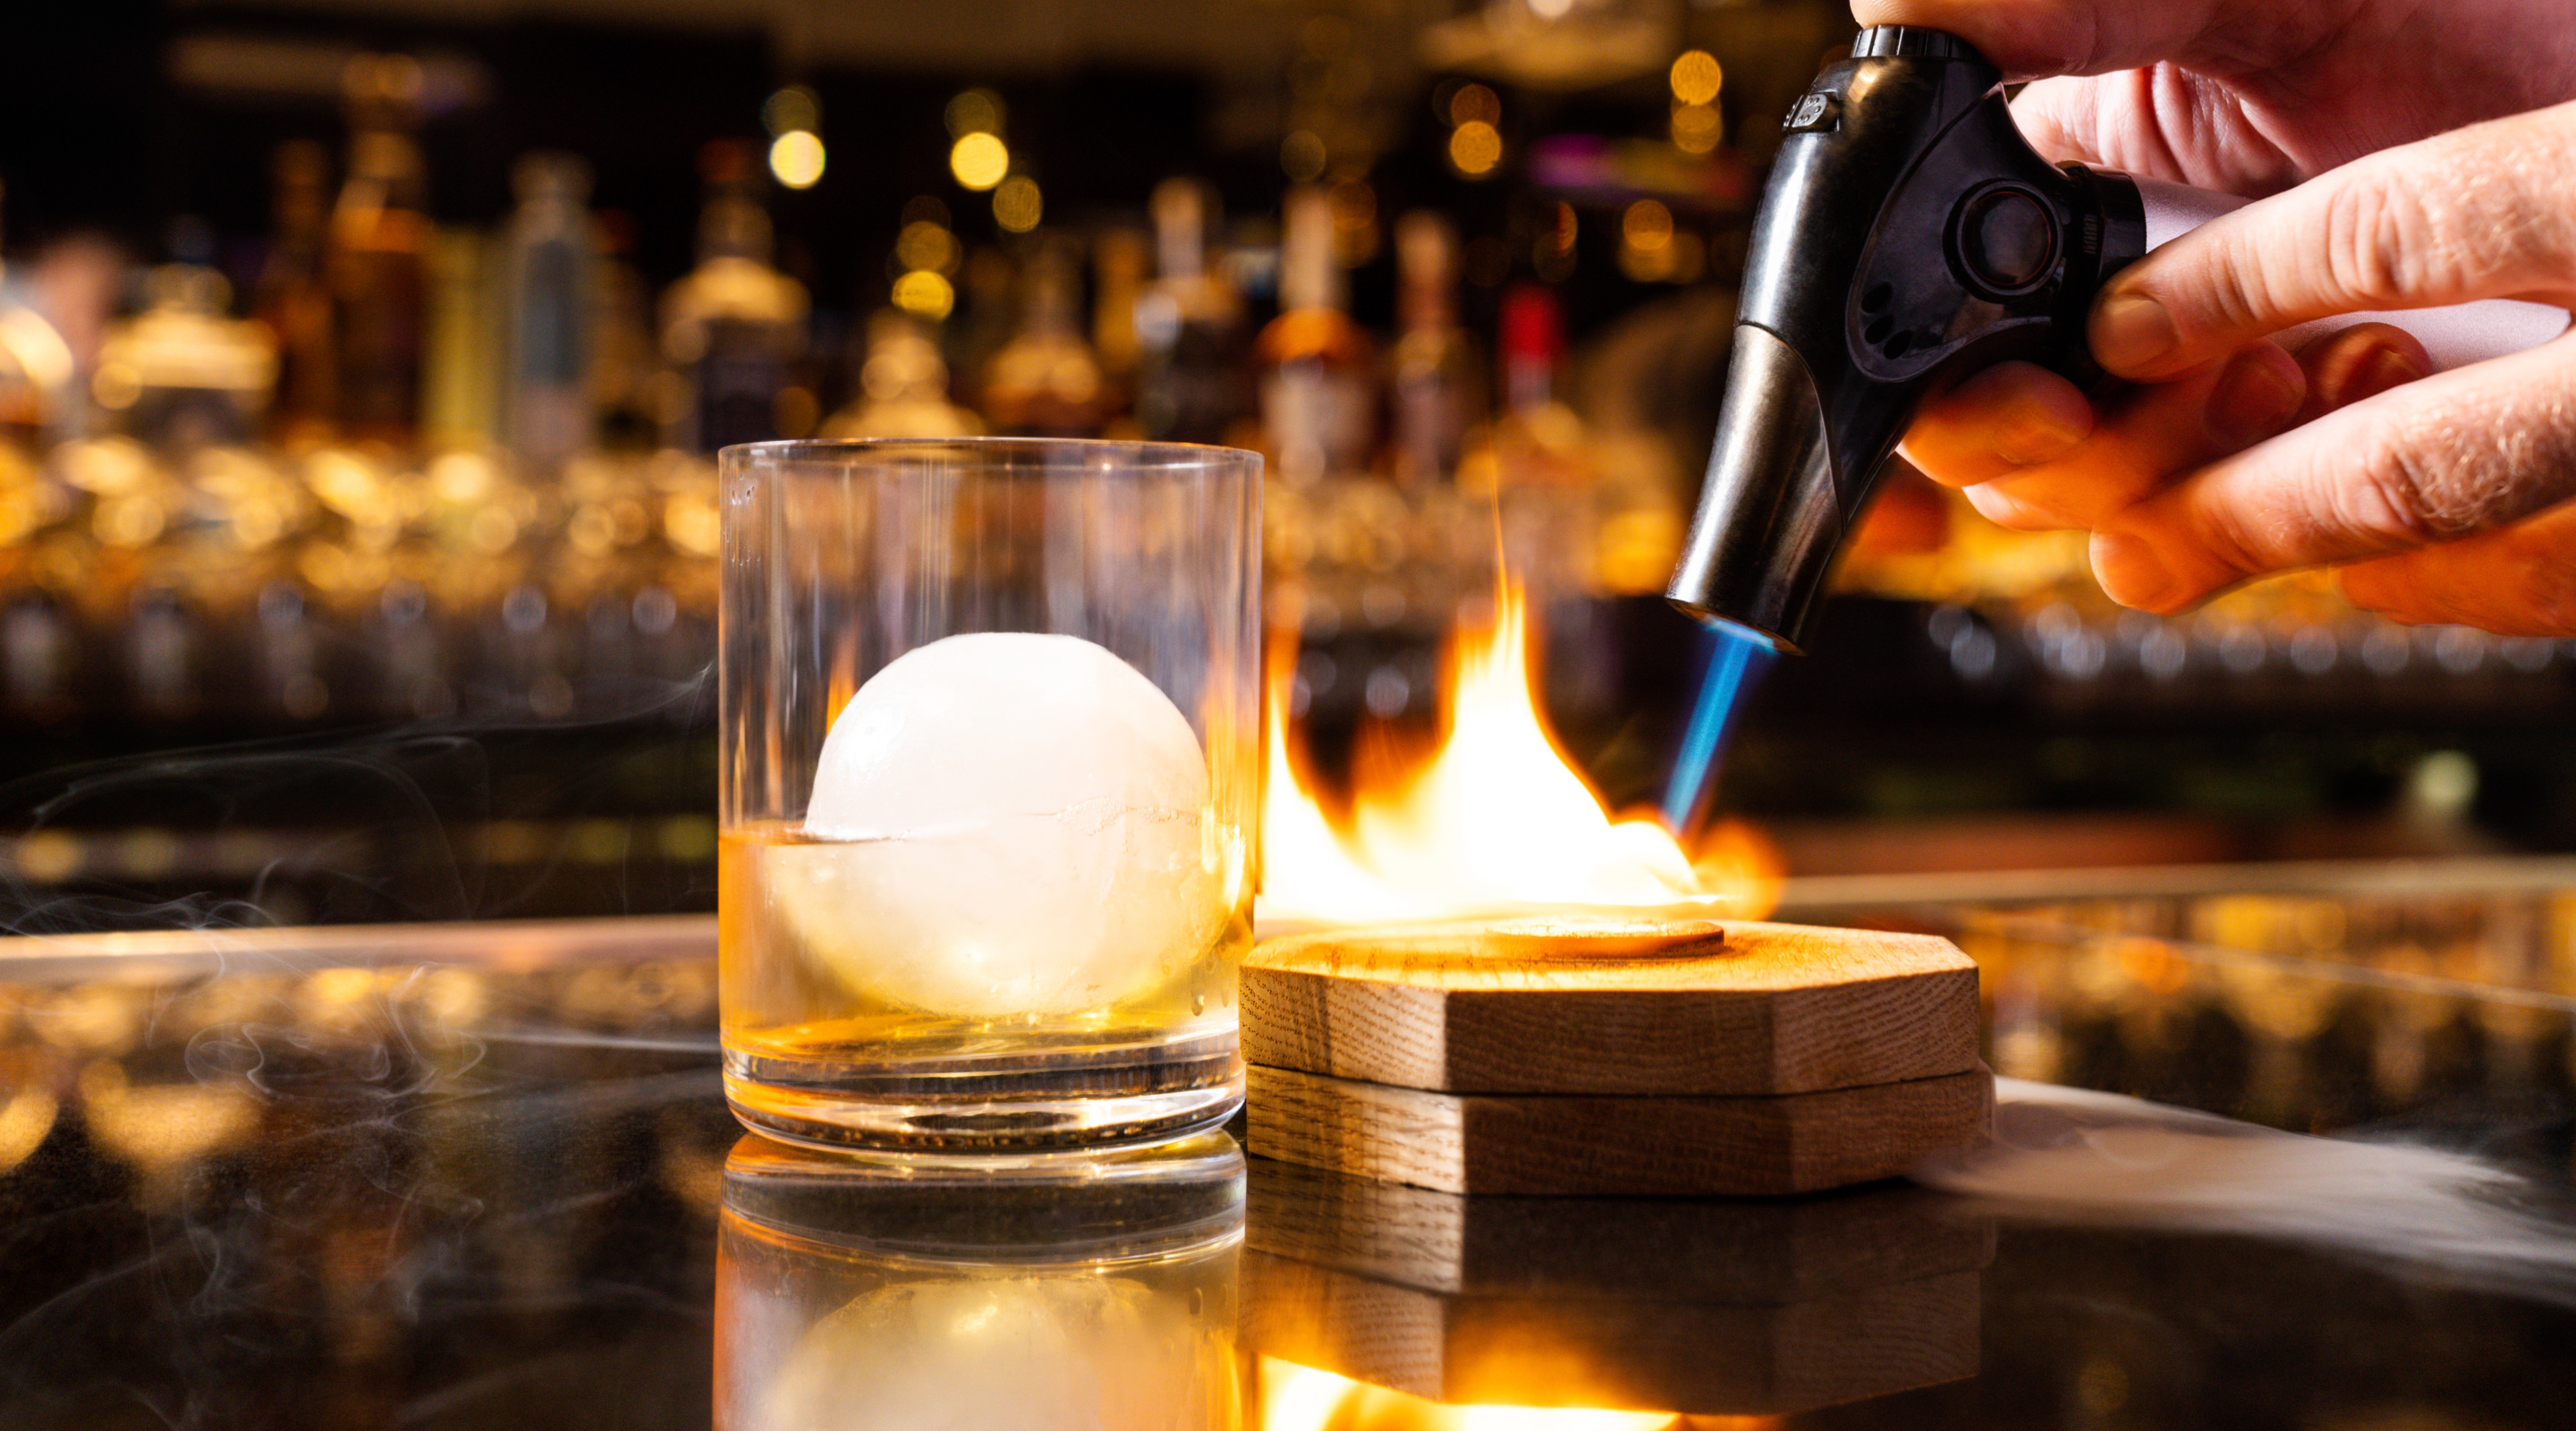 A smoked Old Fashioned cocktail with a circular ice cube in a rocks glass.